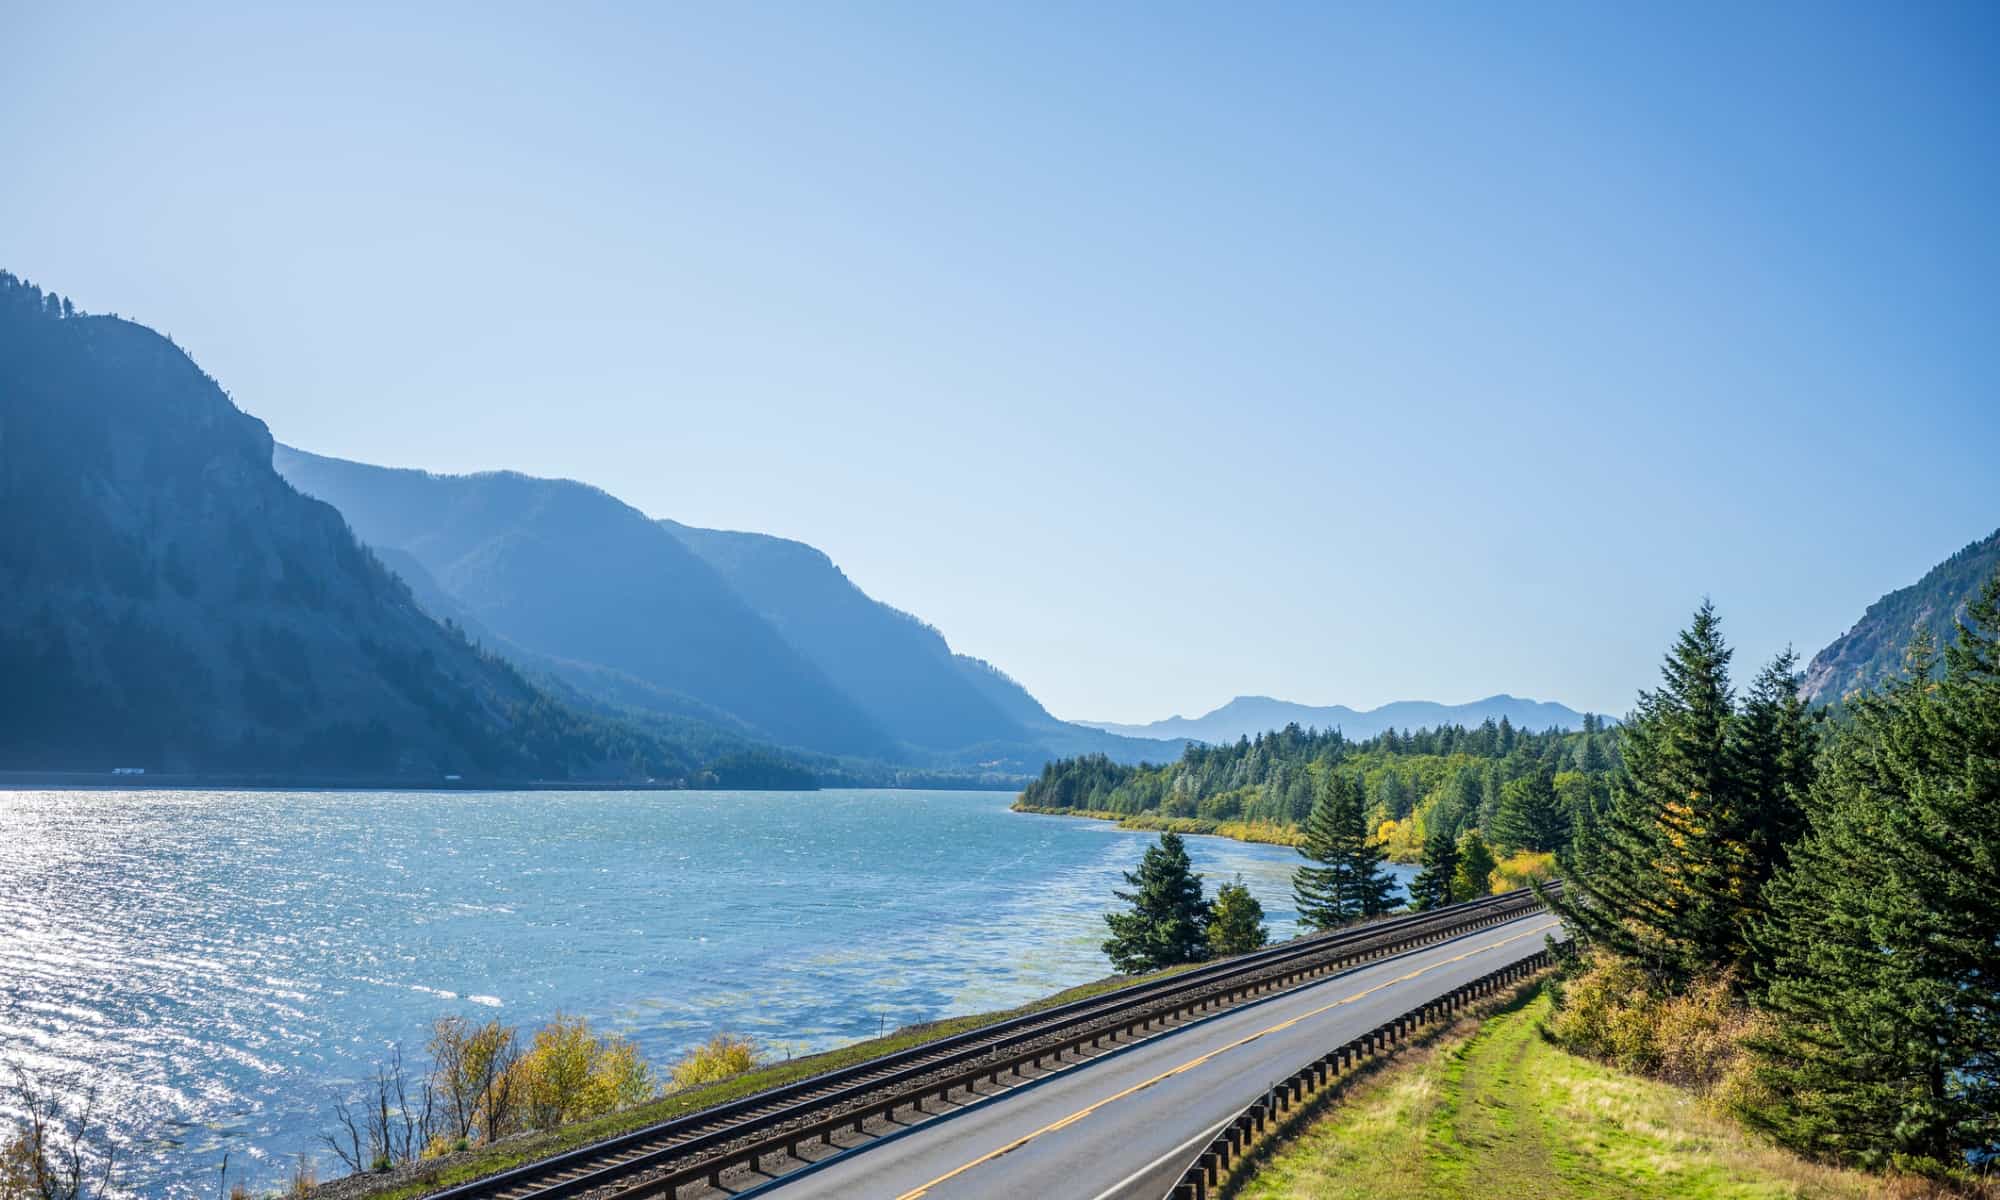 How Wide is the Columbia River at Its Widest Point?